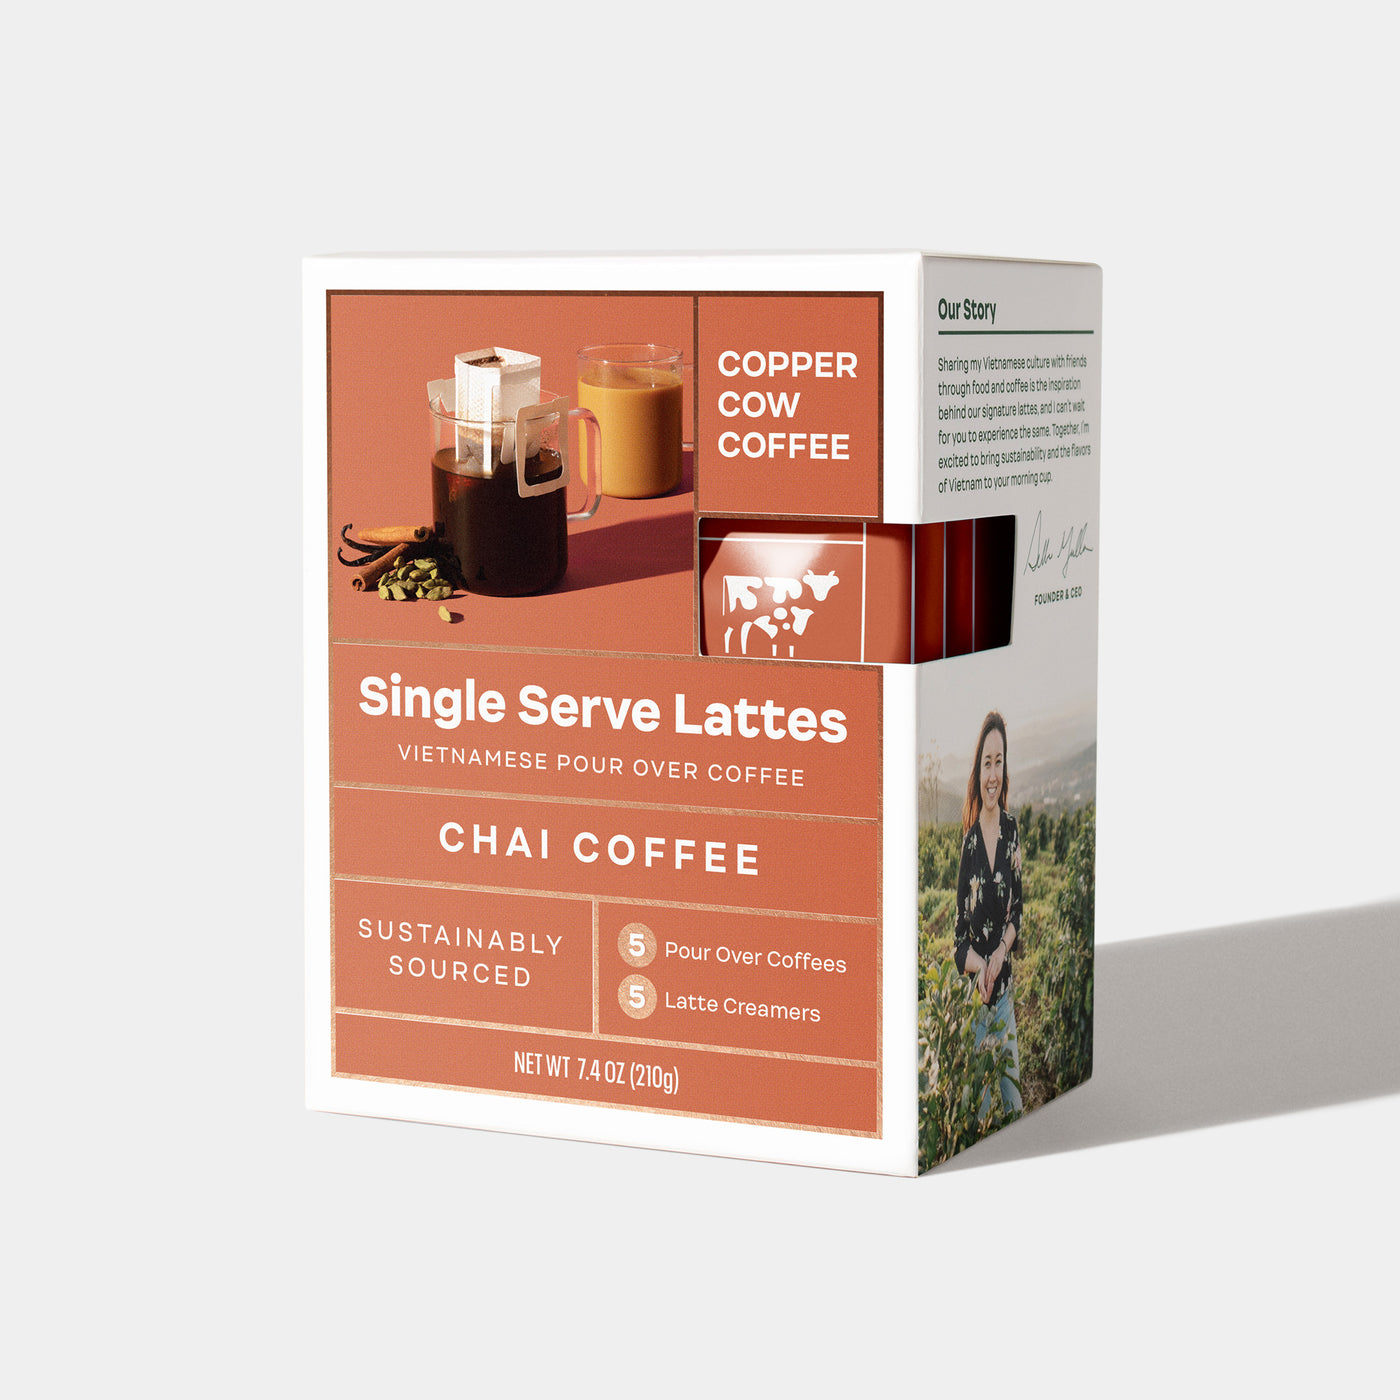 5-Pack of Chai Coffee Vietnamese Latte single-serve pour over pouches in closed box.